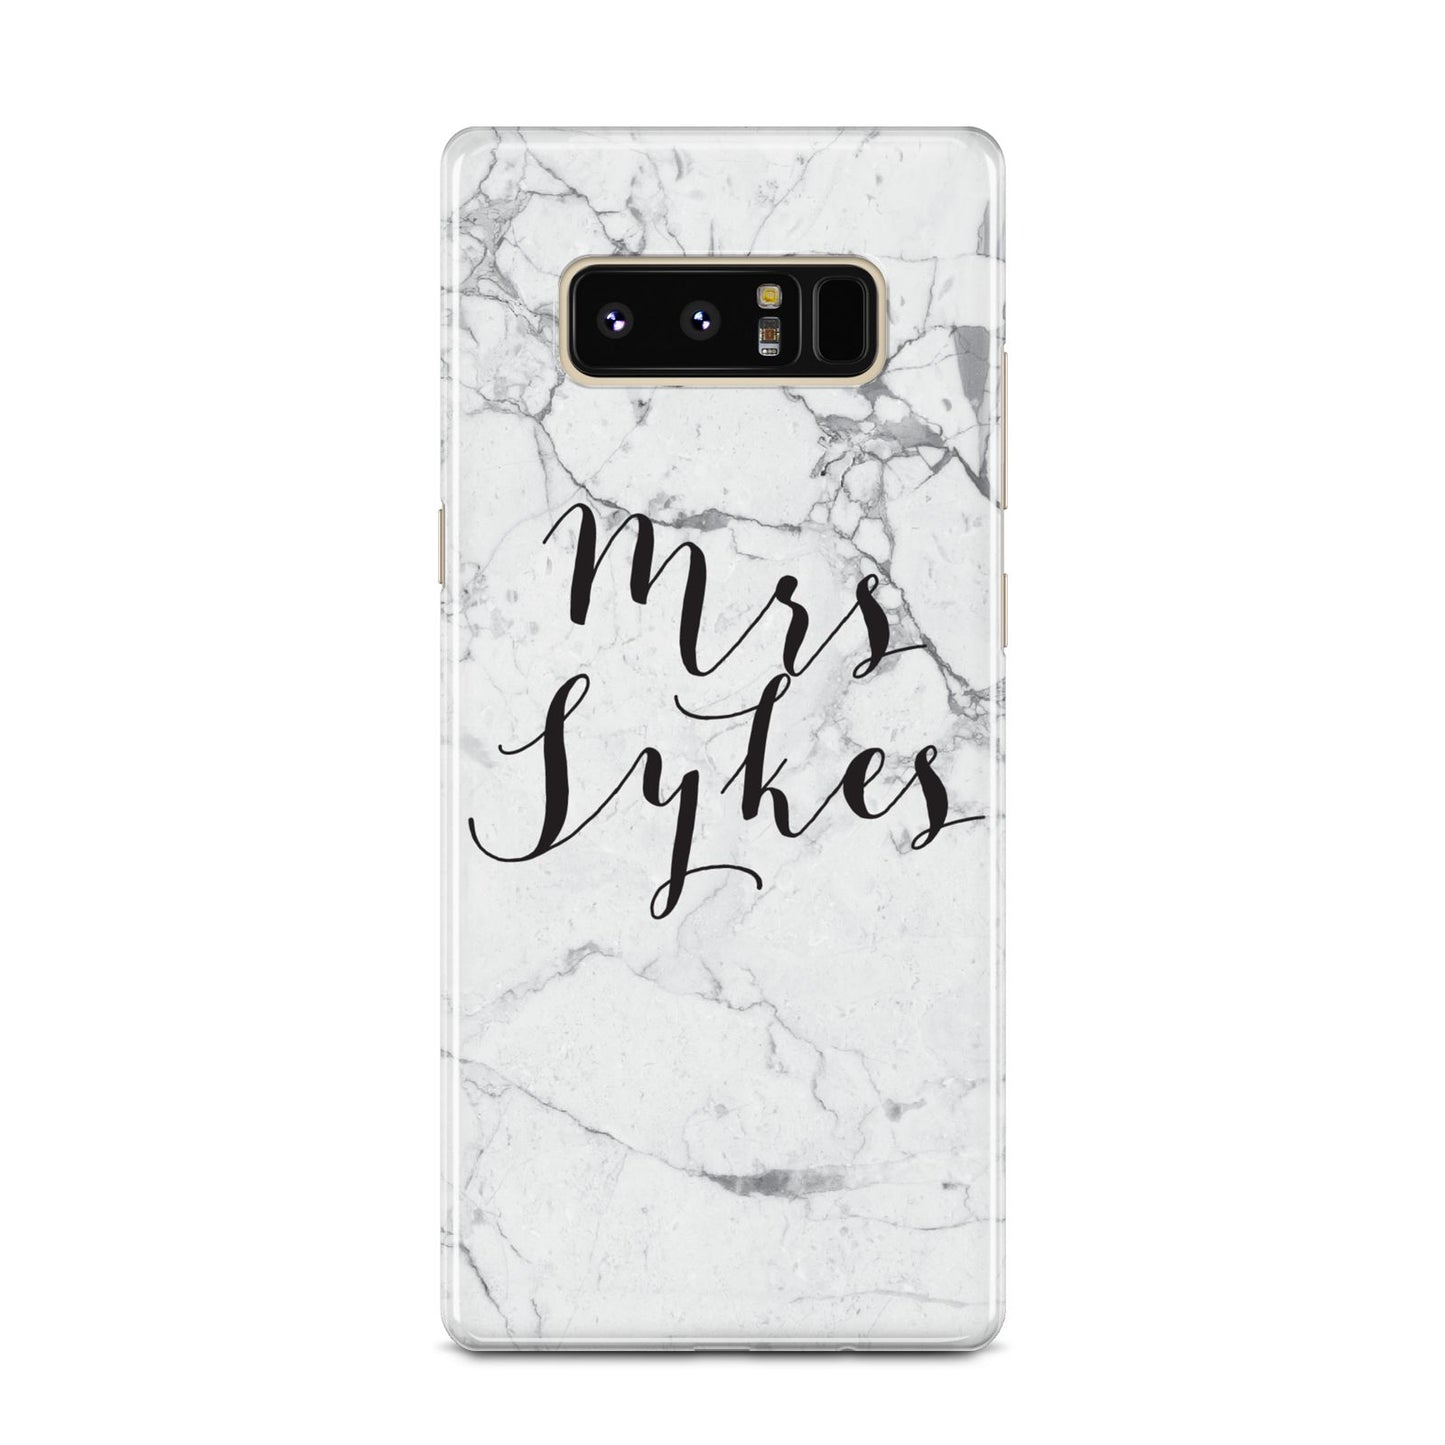 Surname Personalised Marble Samsung Galaxy Note 8 Case